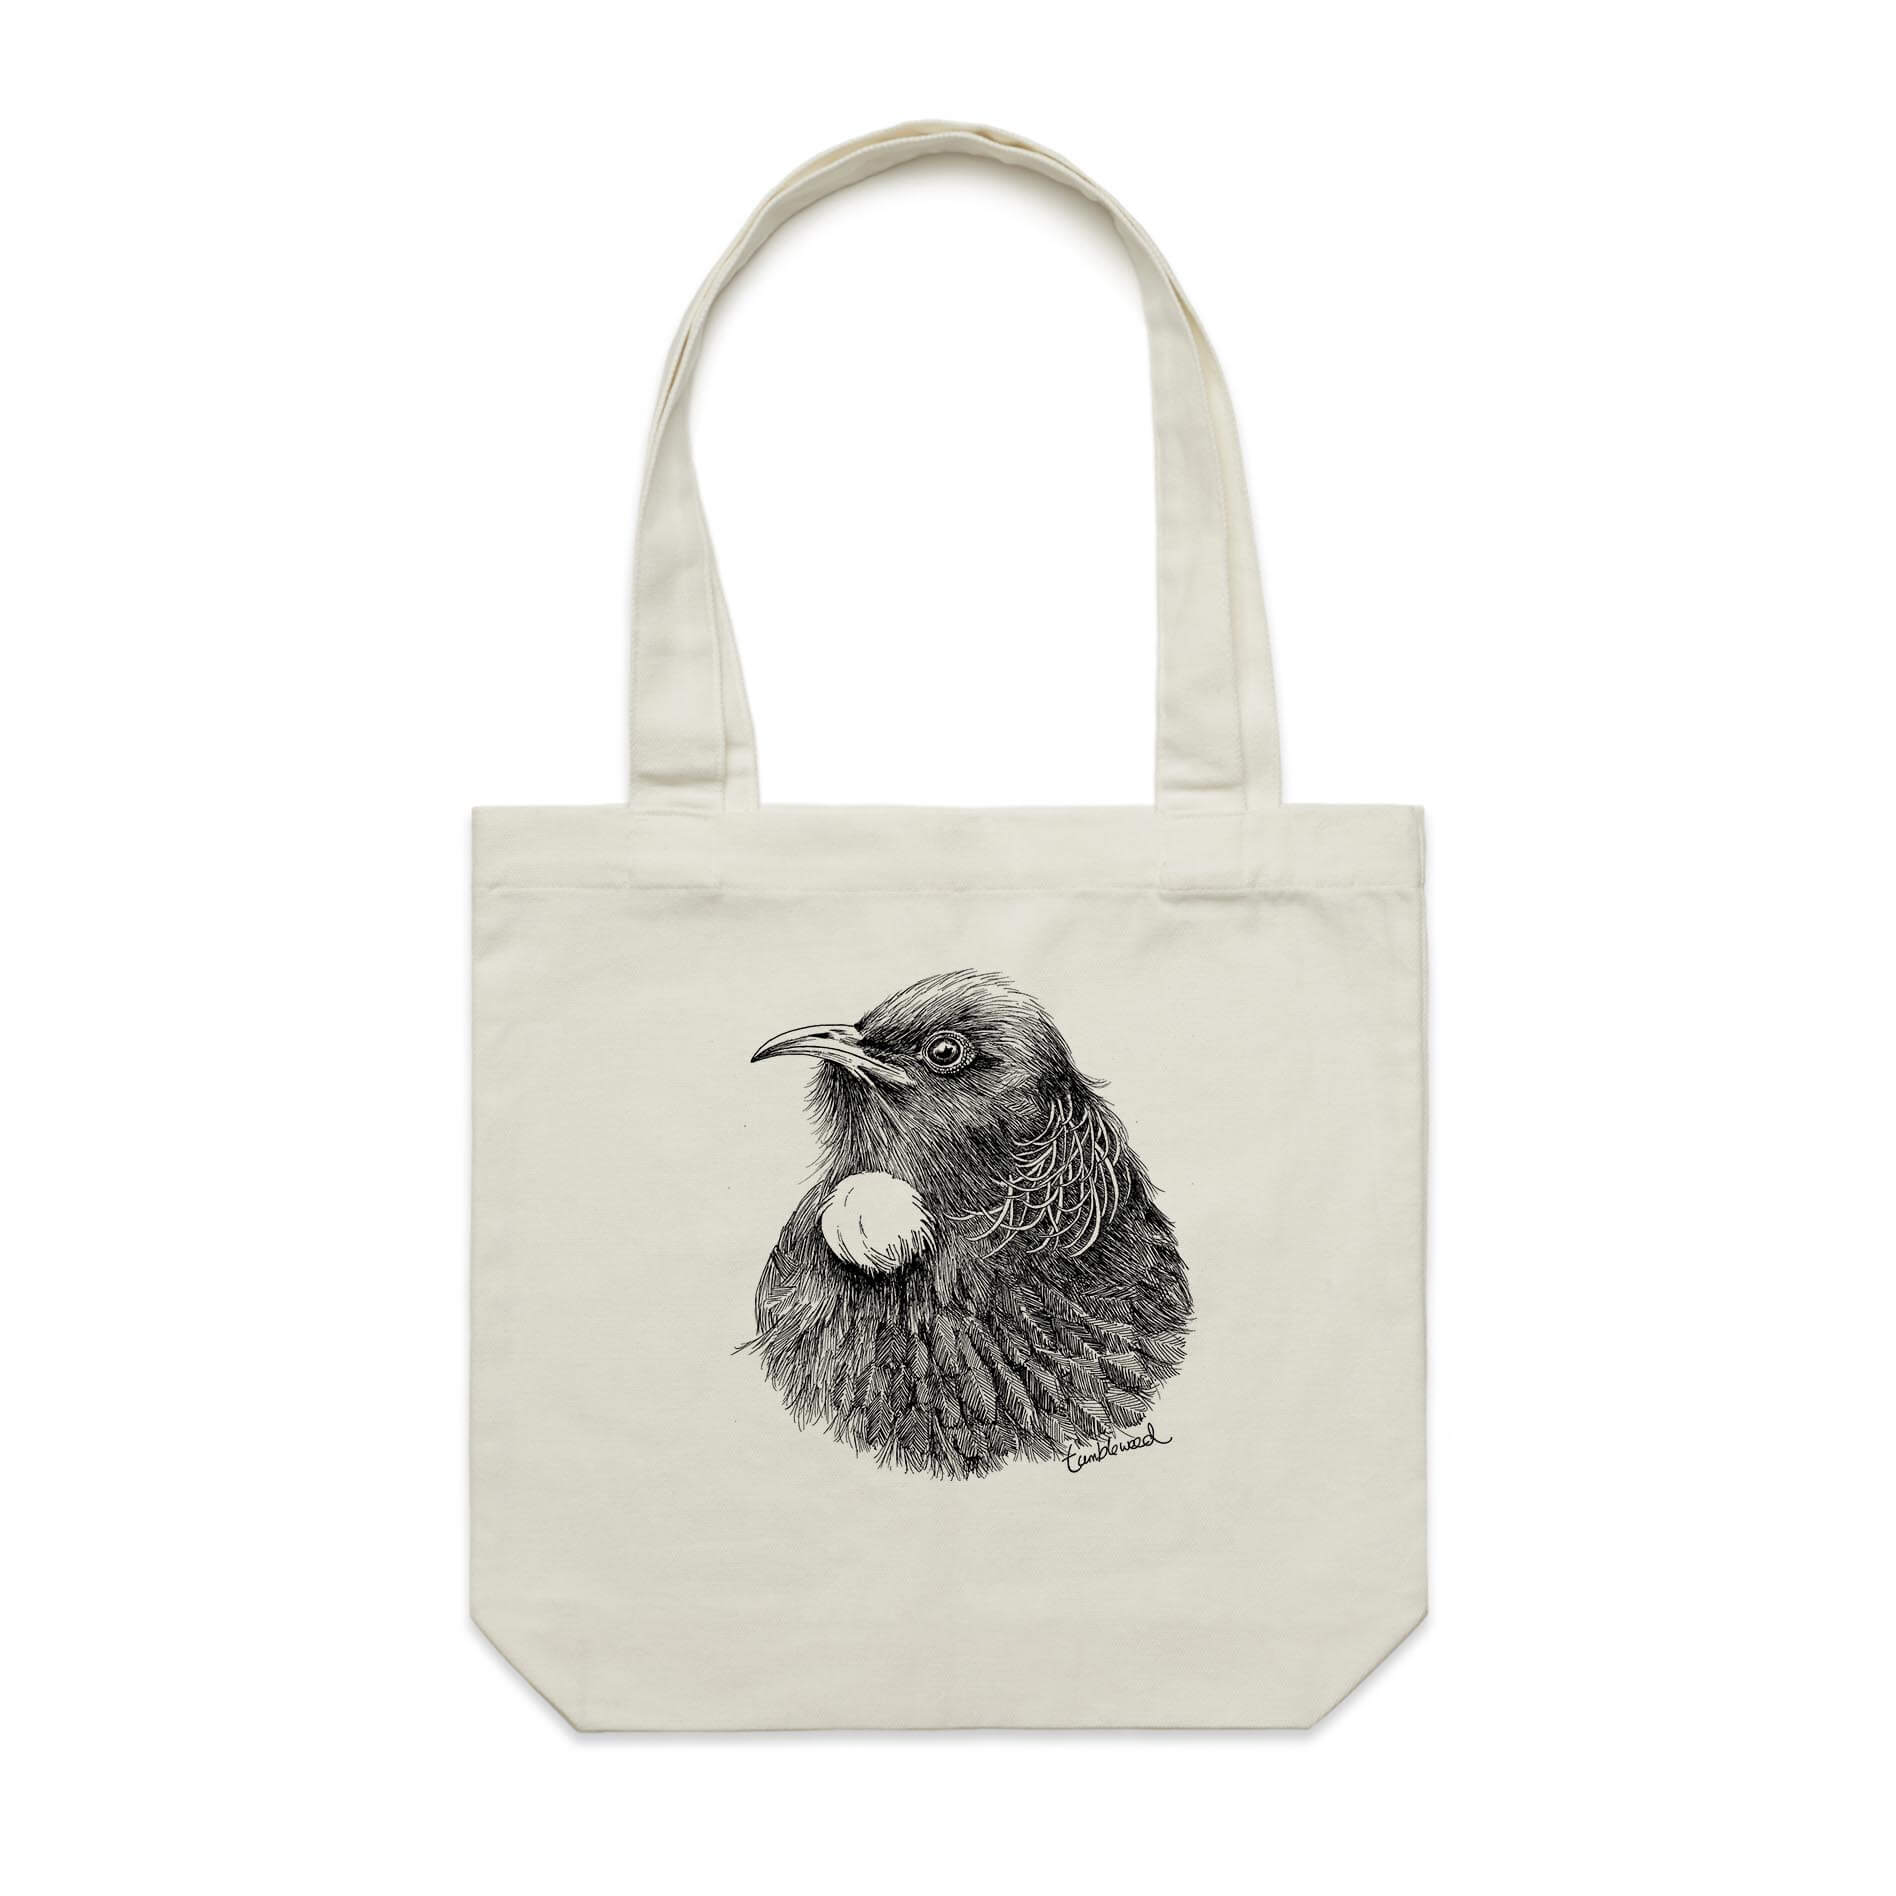 Cotton canvas tote bag with a screen printed Tui design.